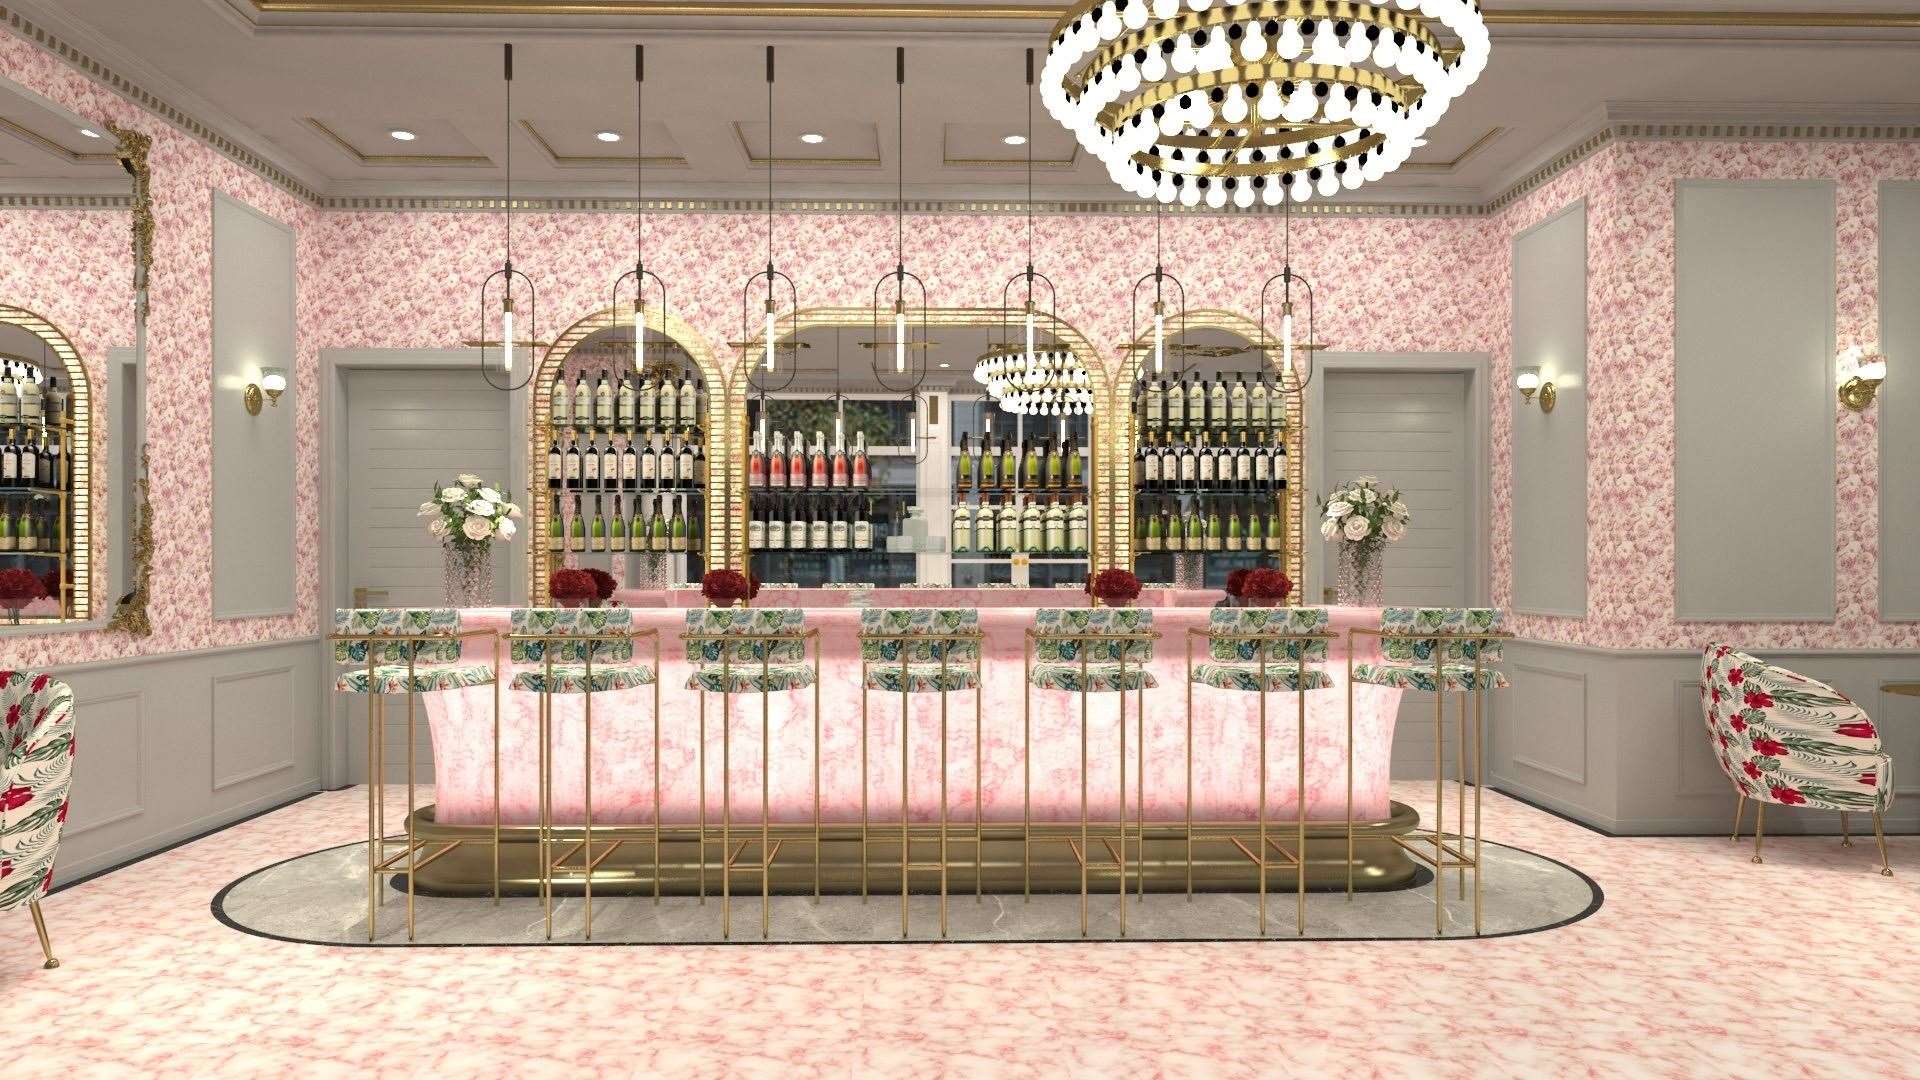 A pink marble bar will be the centrepiece